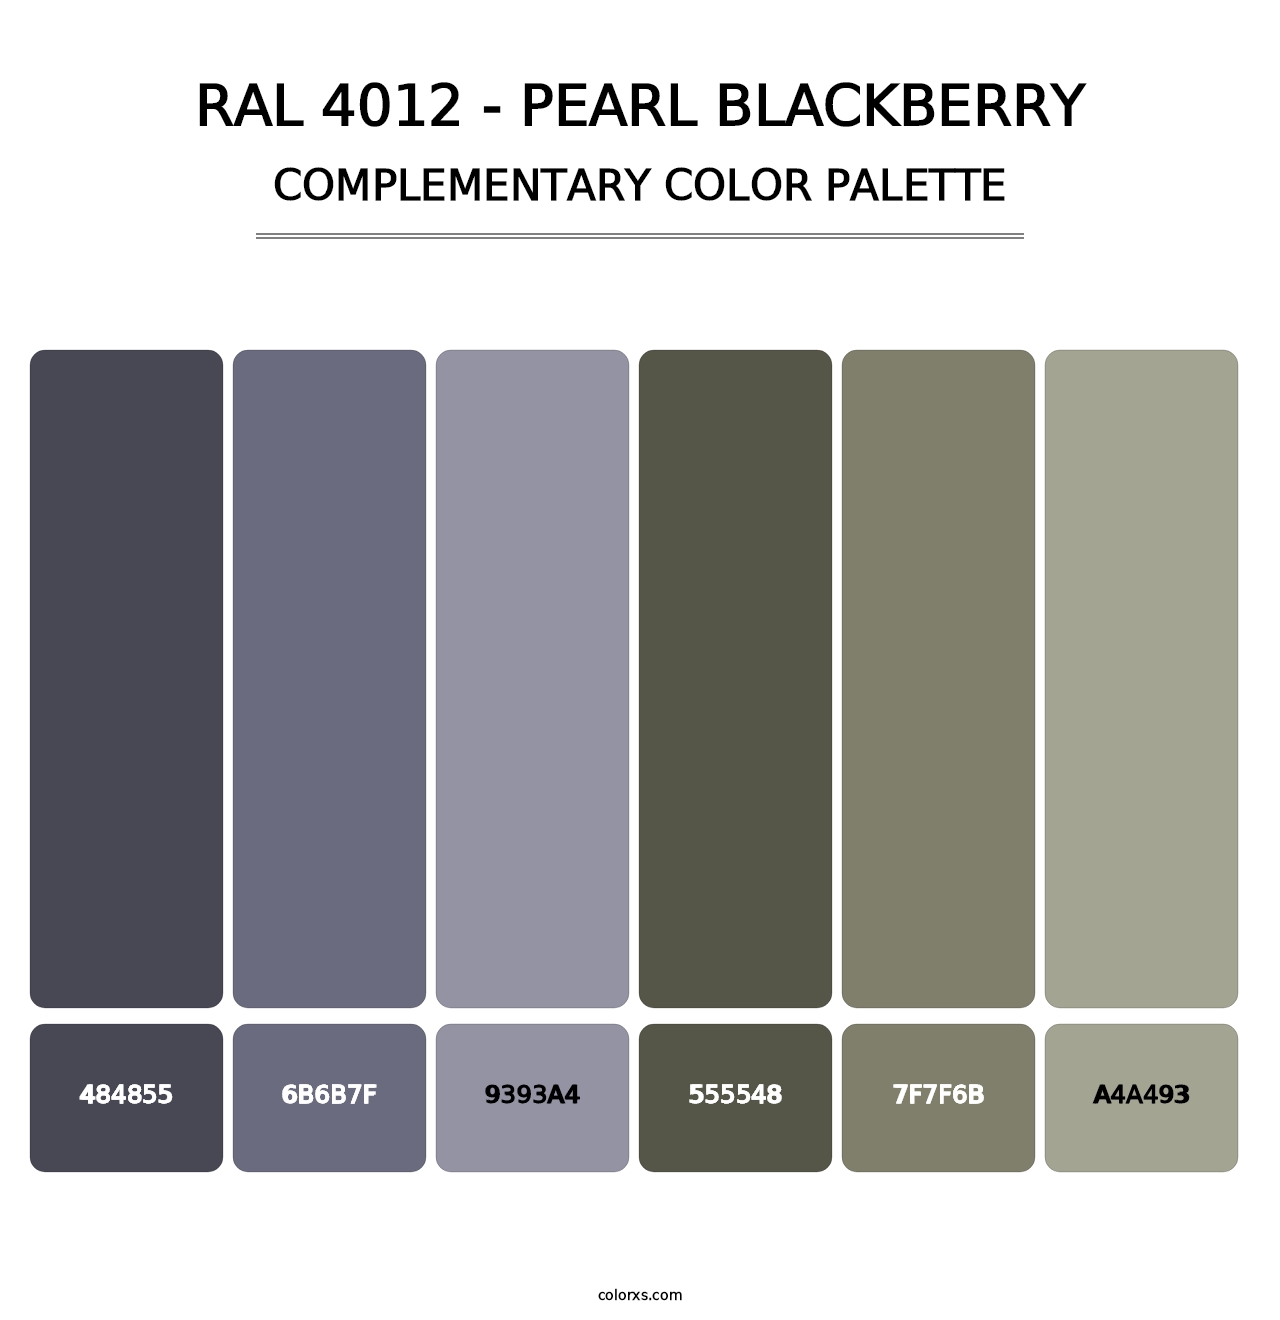 RAL 4012 - Pearl Blackberry - Complementary Color Palette